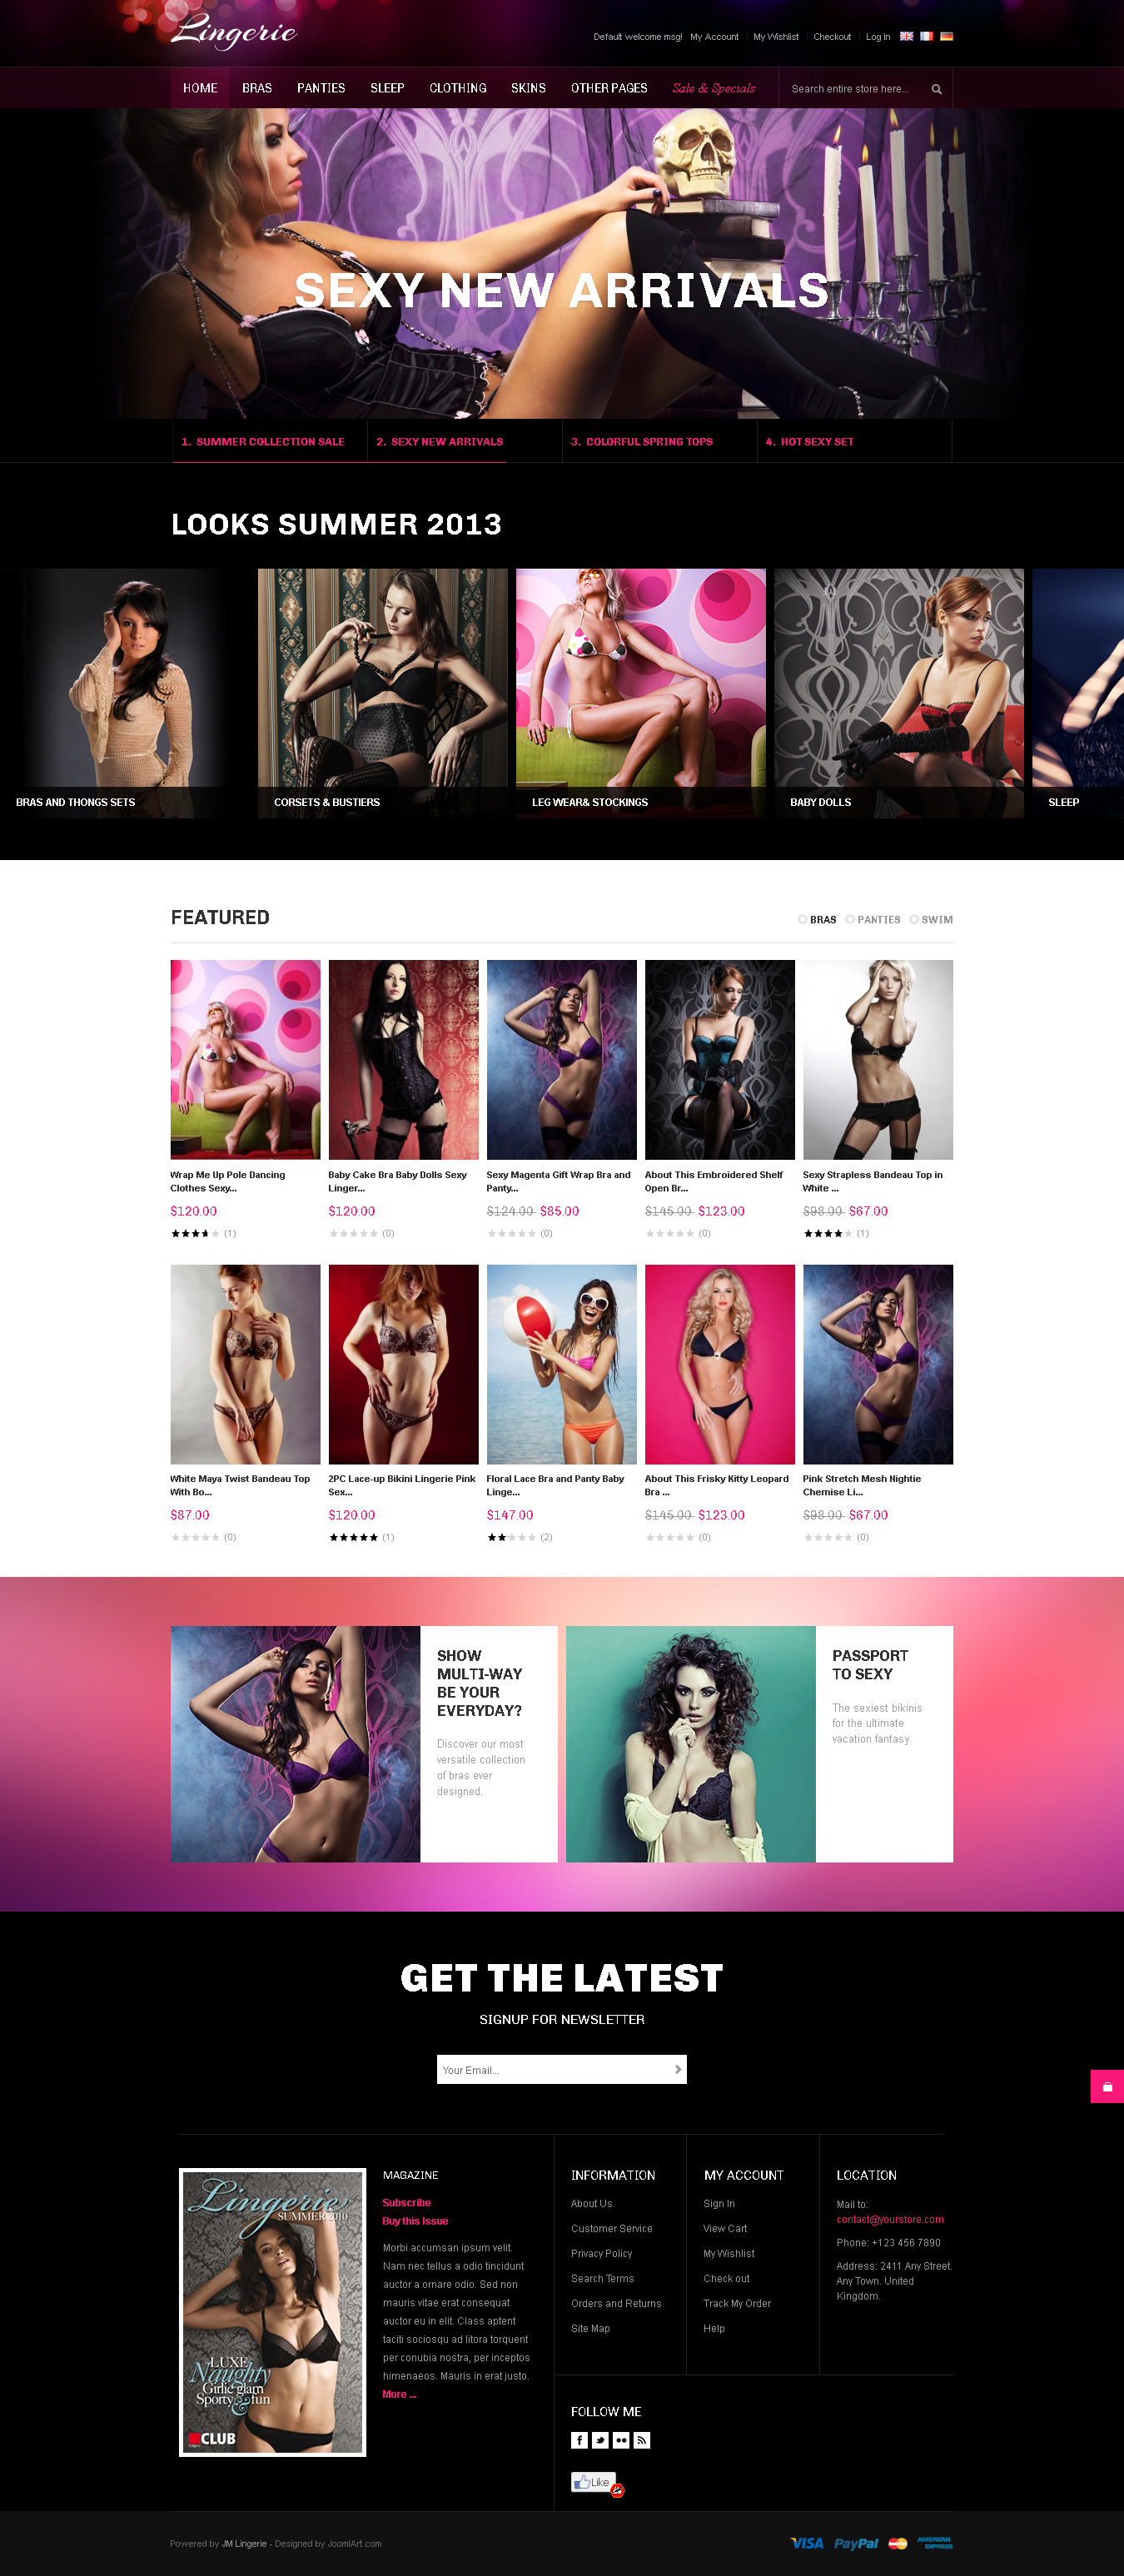 Top Magento themes for Lingerie Store - JM Lingerie - Responsive theme for Lingerie Store